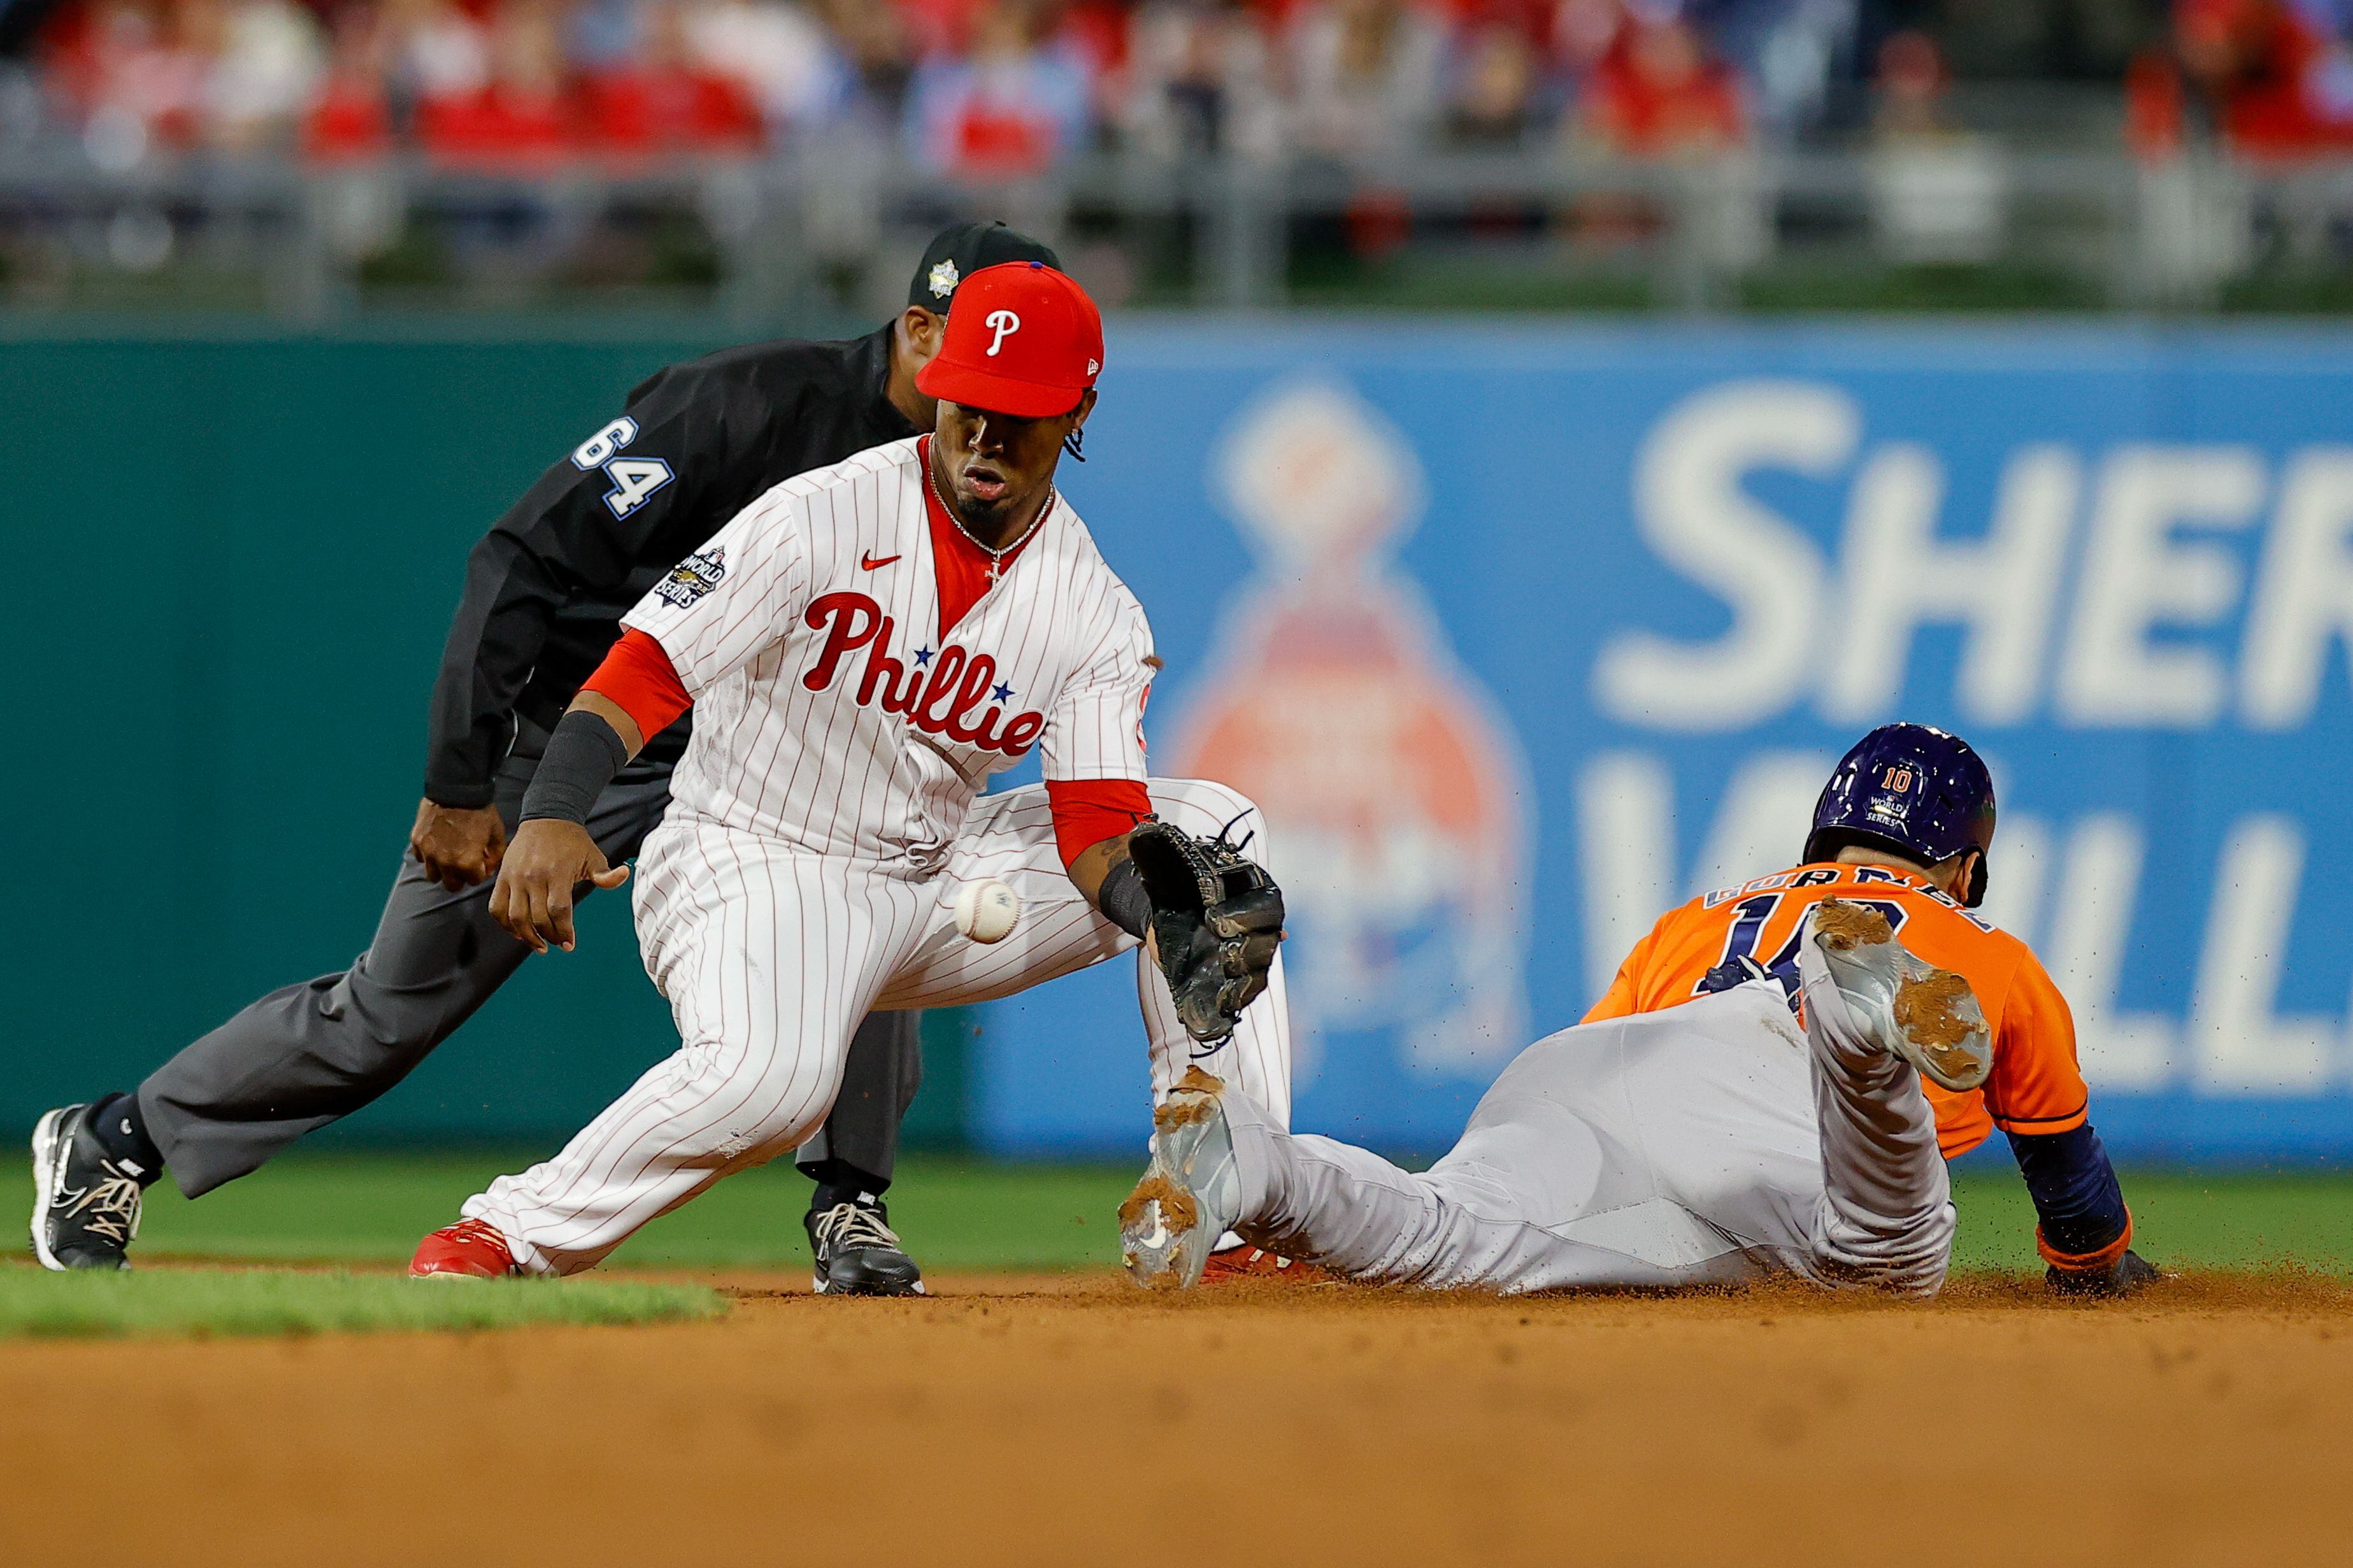 The Phillies' Jimmy Rollins On Track to Make History - The Good Phight